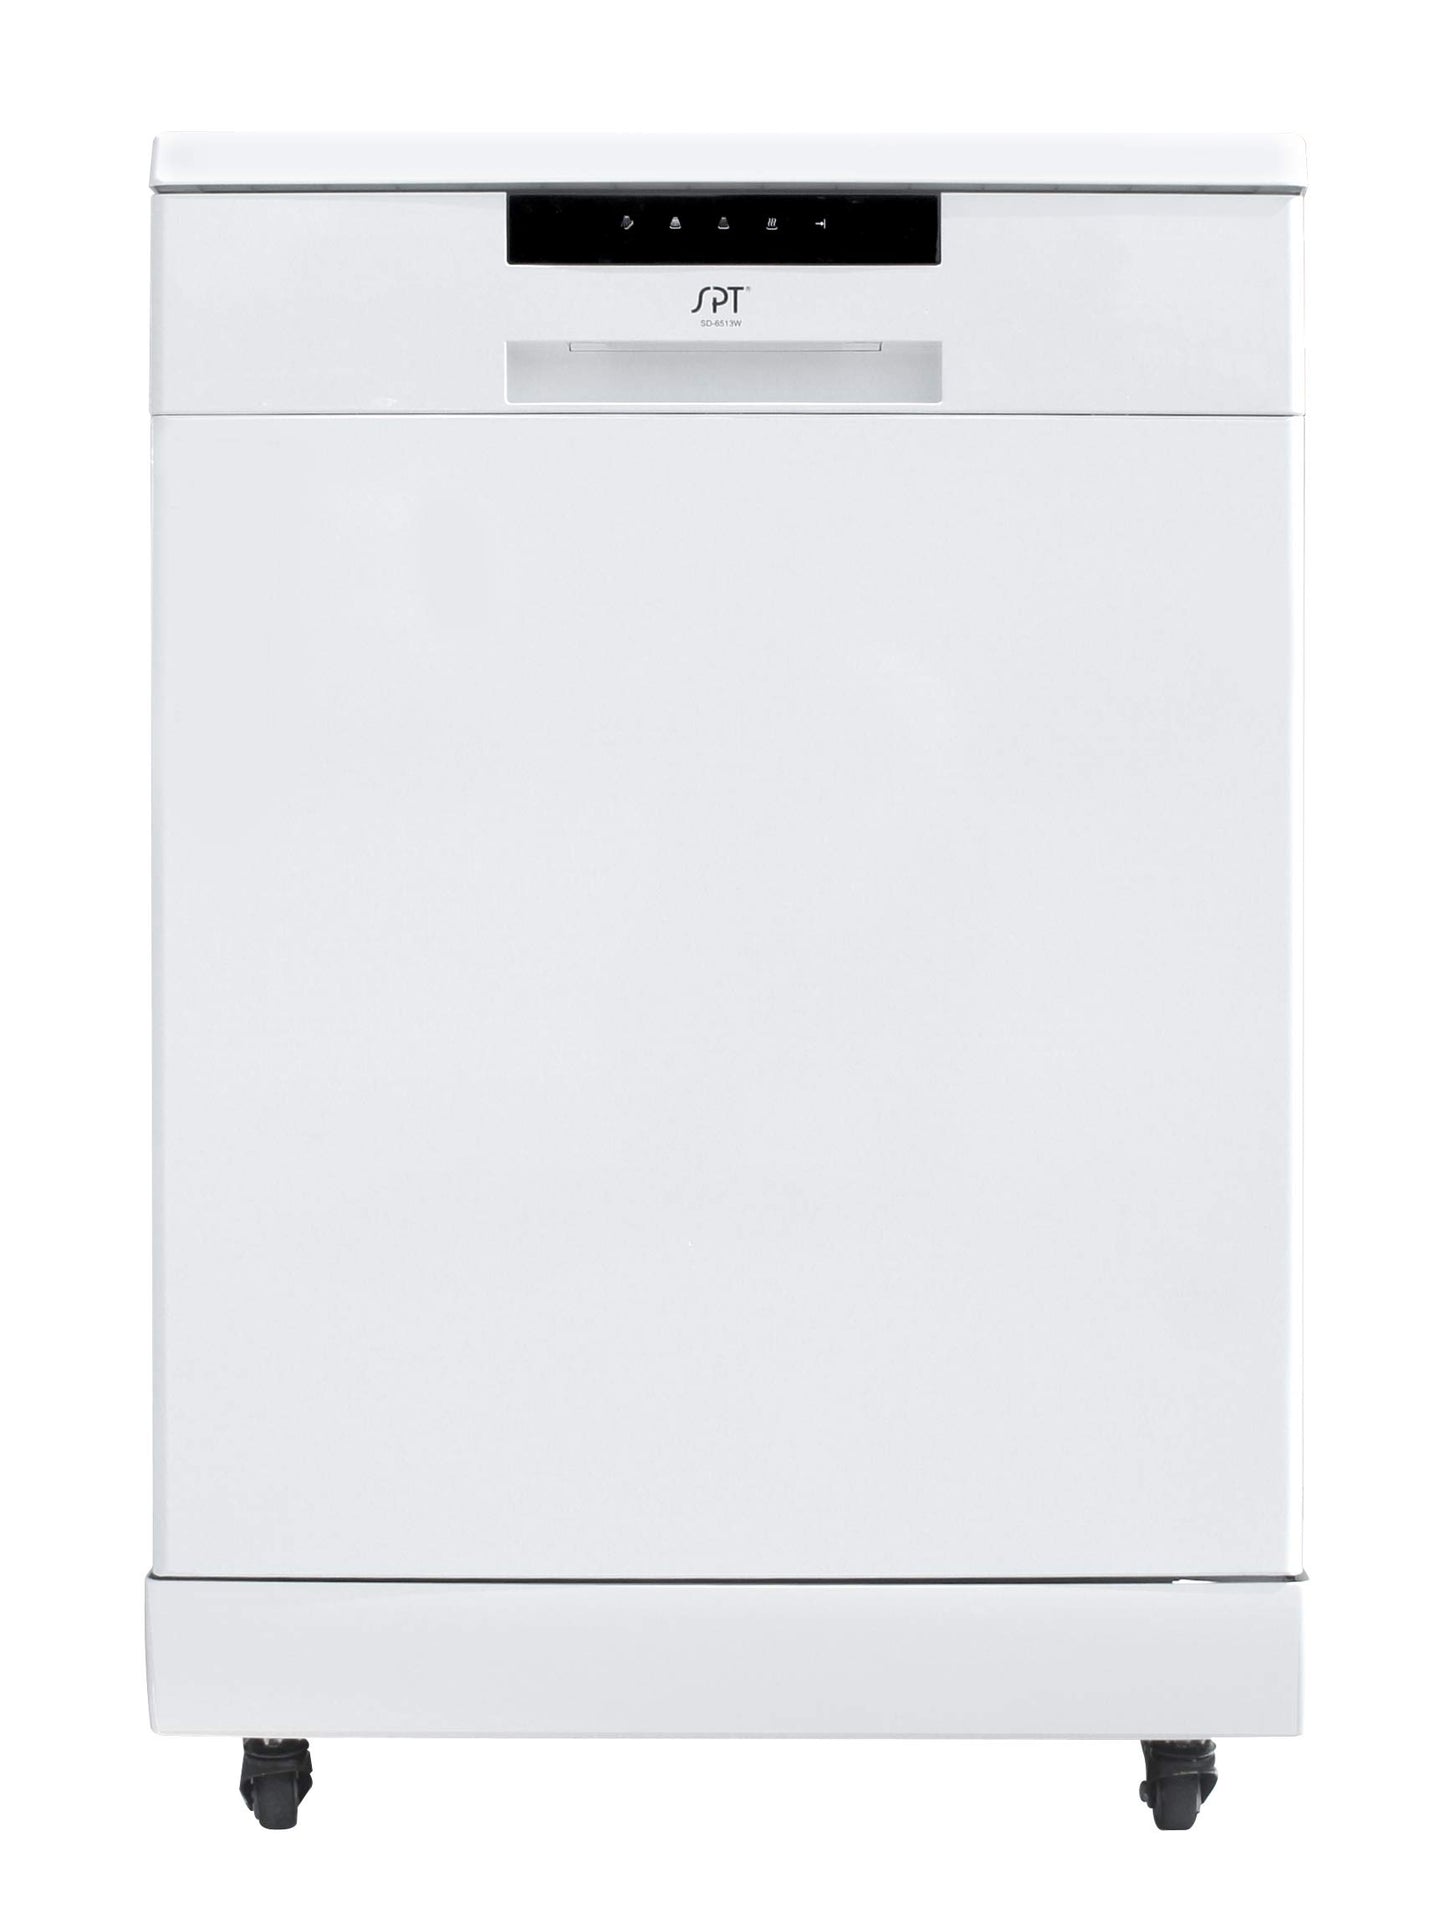 SPT SD-6513WB 24″ Wide Portable Dishwasher with ENERGY STAR, 6 Wash Programs, 10 Place Settings and Stainless Steel Tub – White